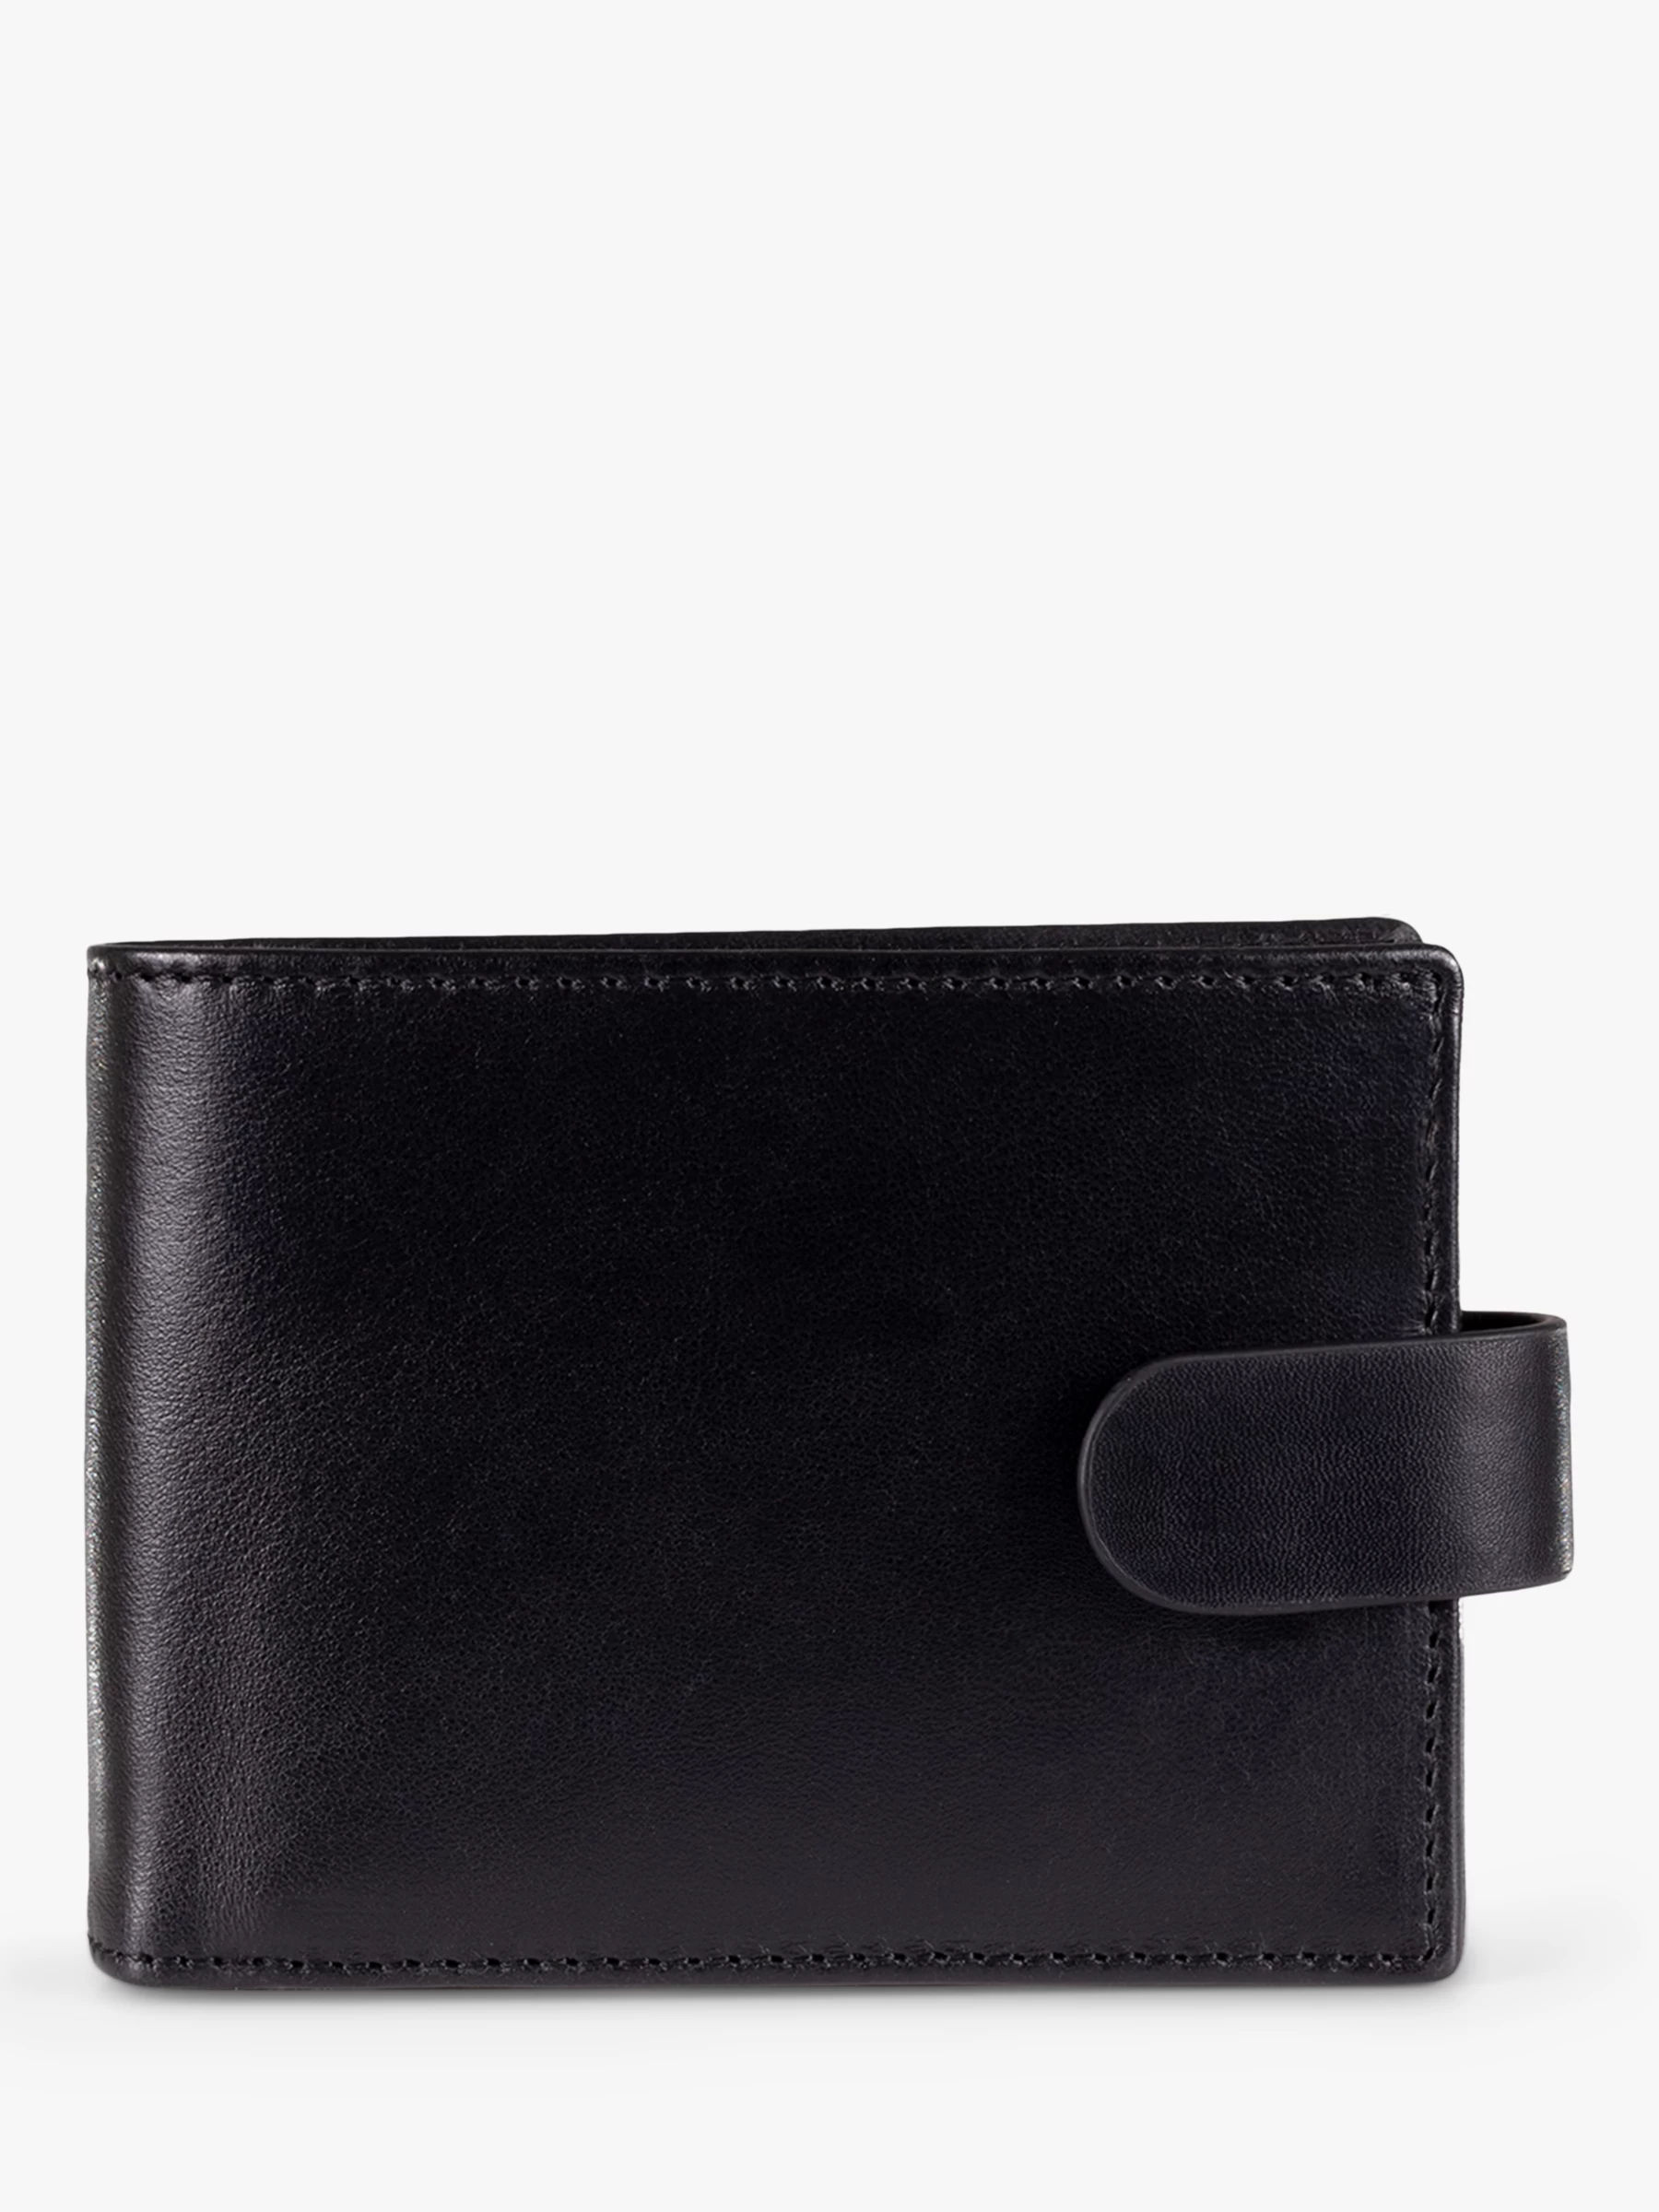 Mulberry Small Classic Grain Leather Zip Coin Pouch, Black at John Lewis &  Partners